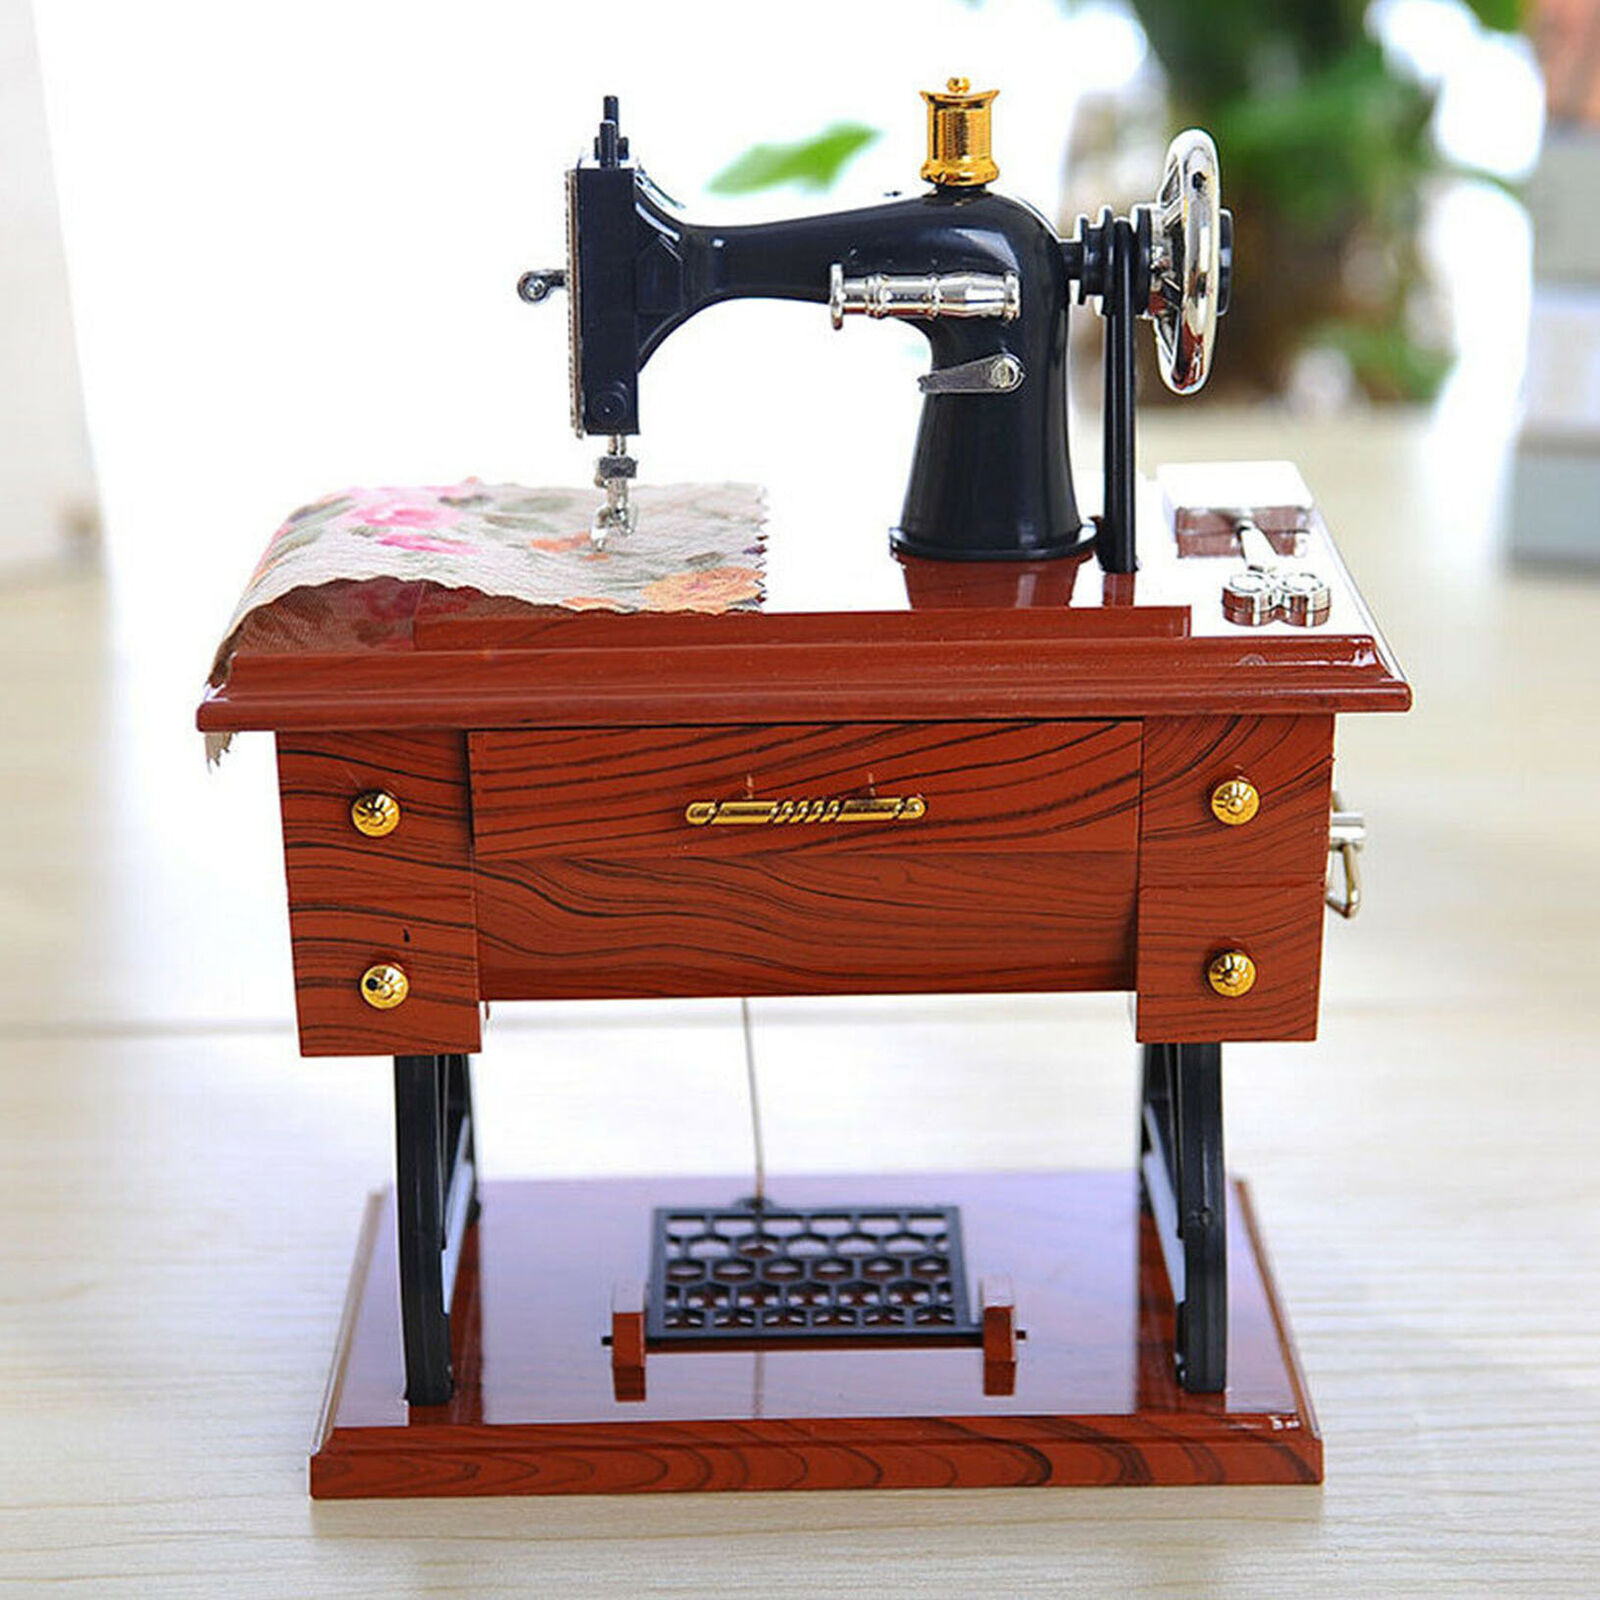 Vintage Music Box Mini Sewing Machine Style Party Birthday Gift Home Table Decor